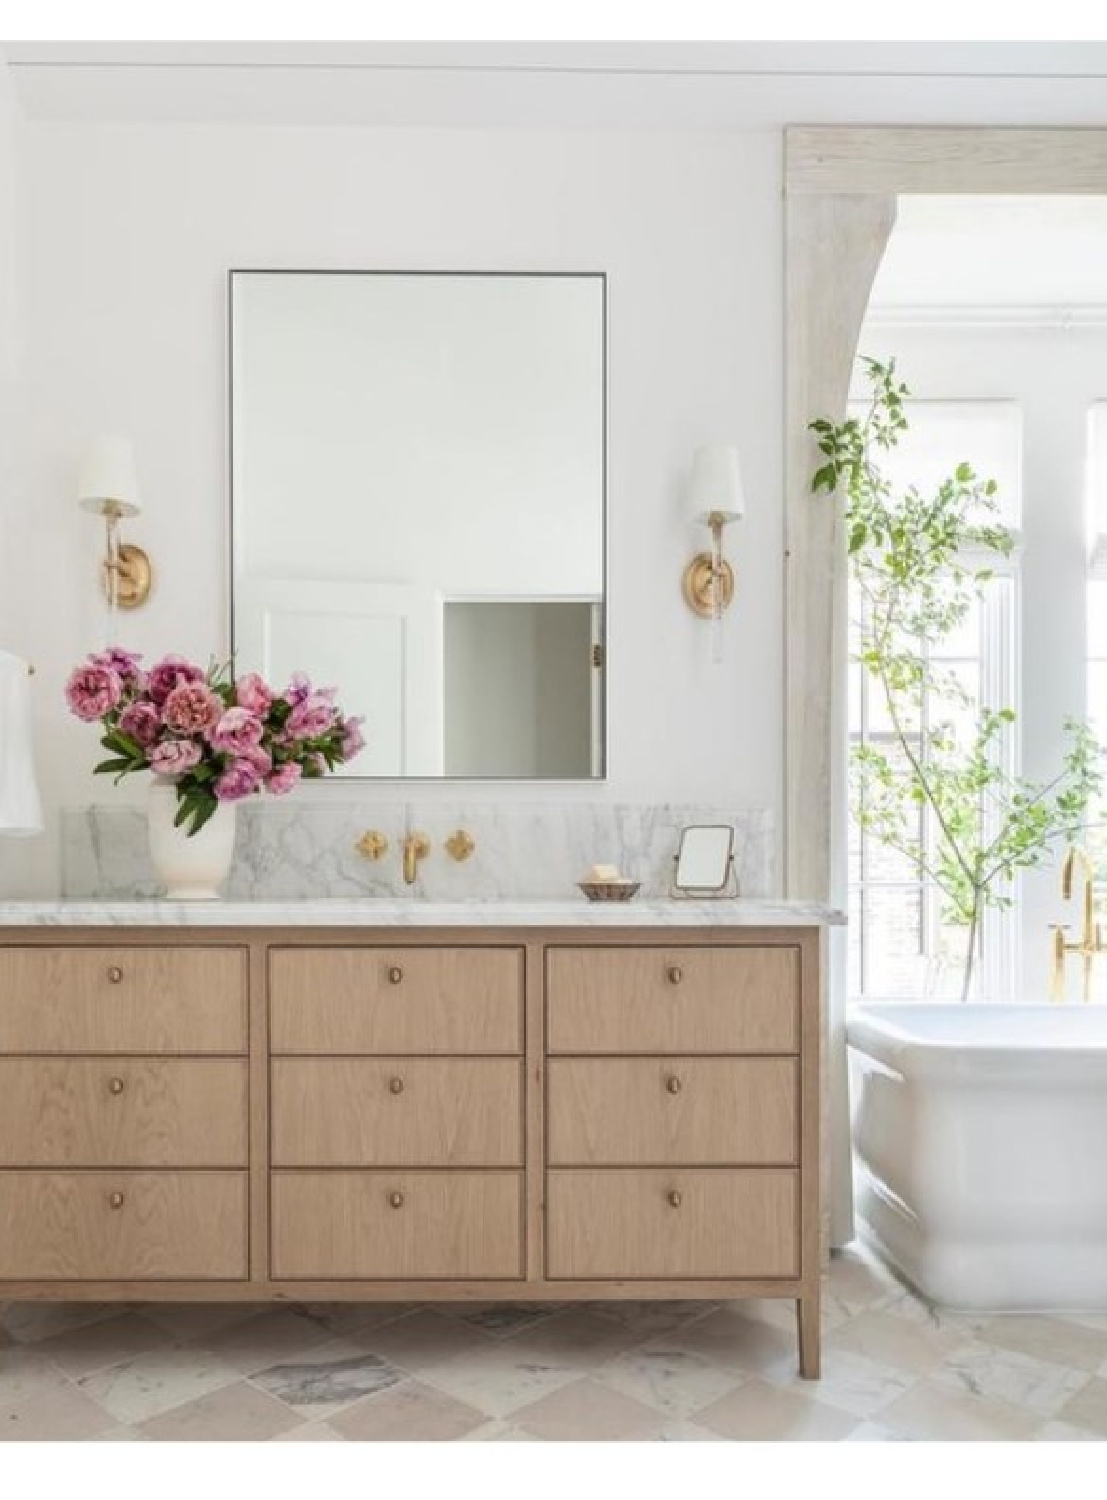 Marie Flanigan designed sconces (Abigail) for Visual Comfort in a lovely timeless bath.